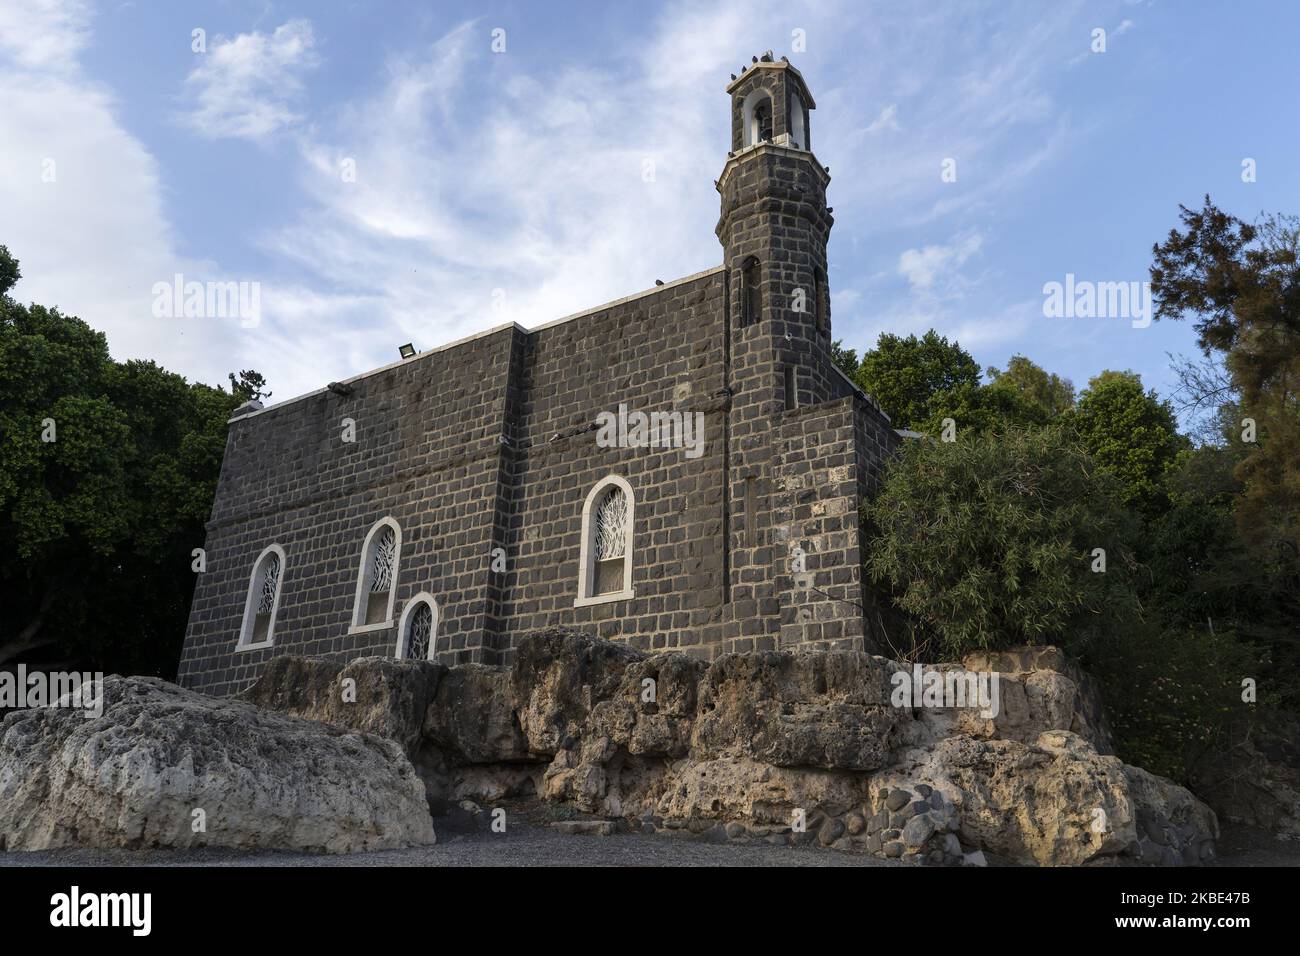 Exterior view of St. Peter's Primate Church is a Franciscan church located in Tabgha, Israel, on the northwest shore of the Sea of Galilee on 10 December 2019. She commemorates the restoration of Peter as head of the Apostles by Jesus. (Photo by Joaquin Gomez Sastre/NurPhoto) Stock Photo